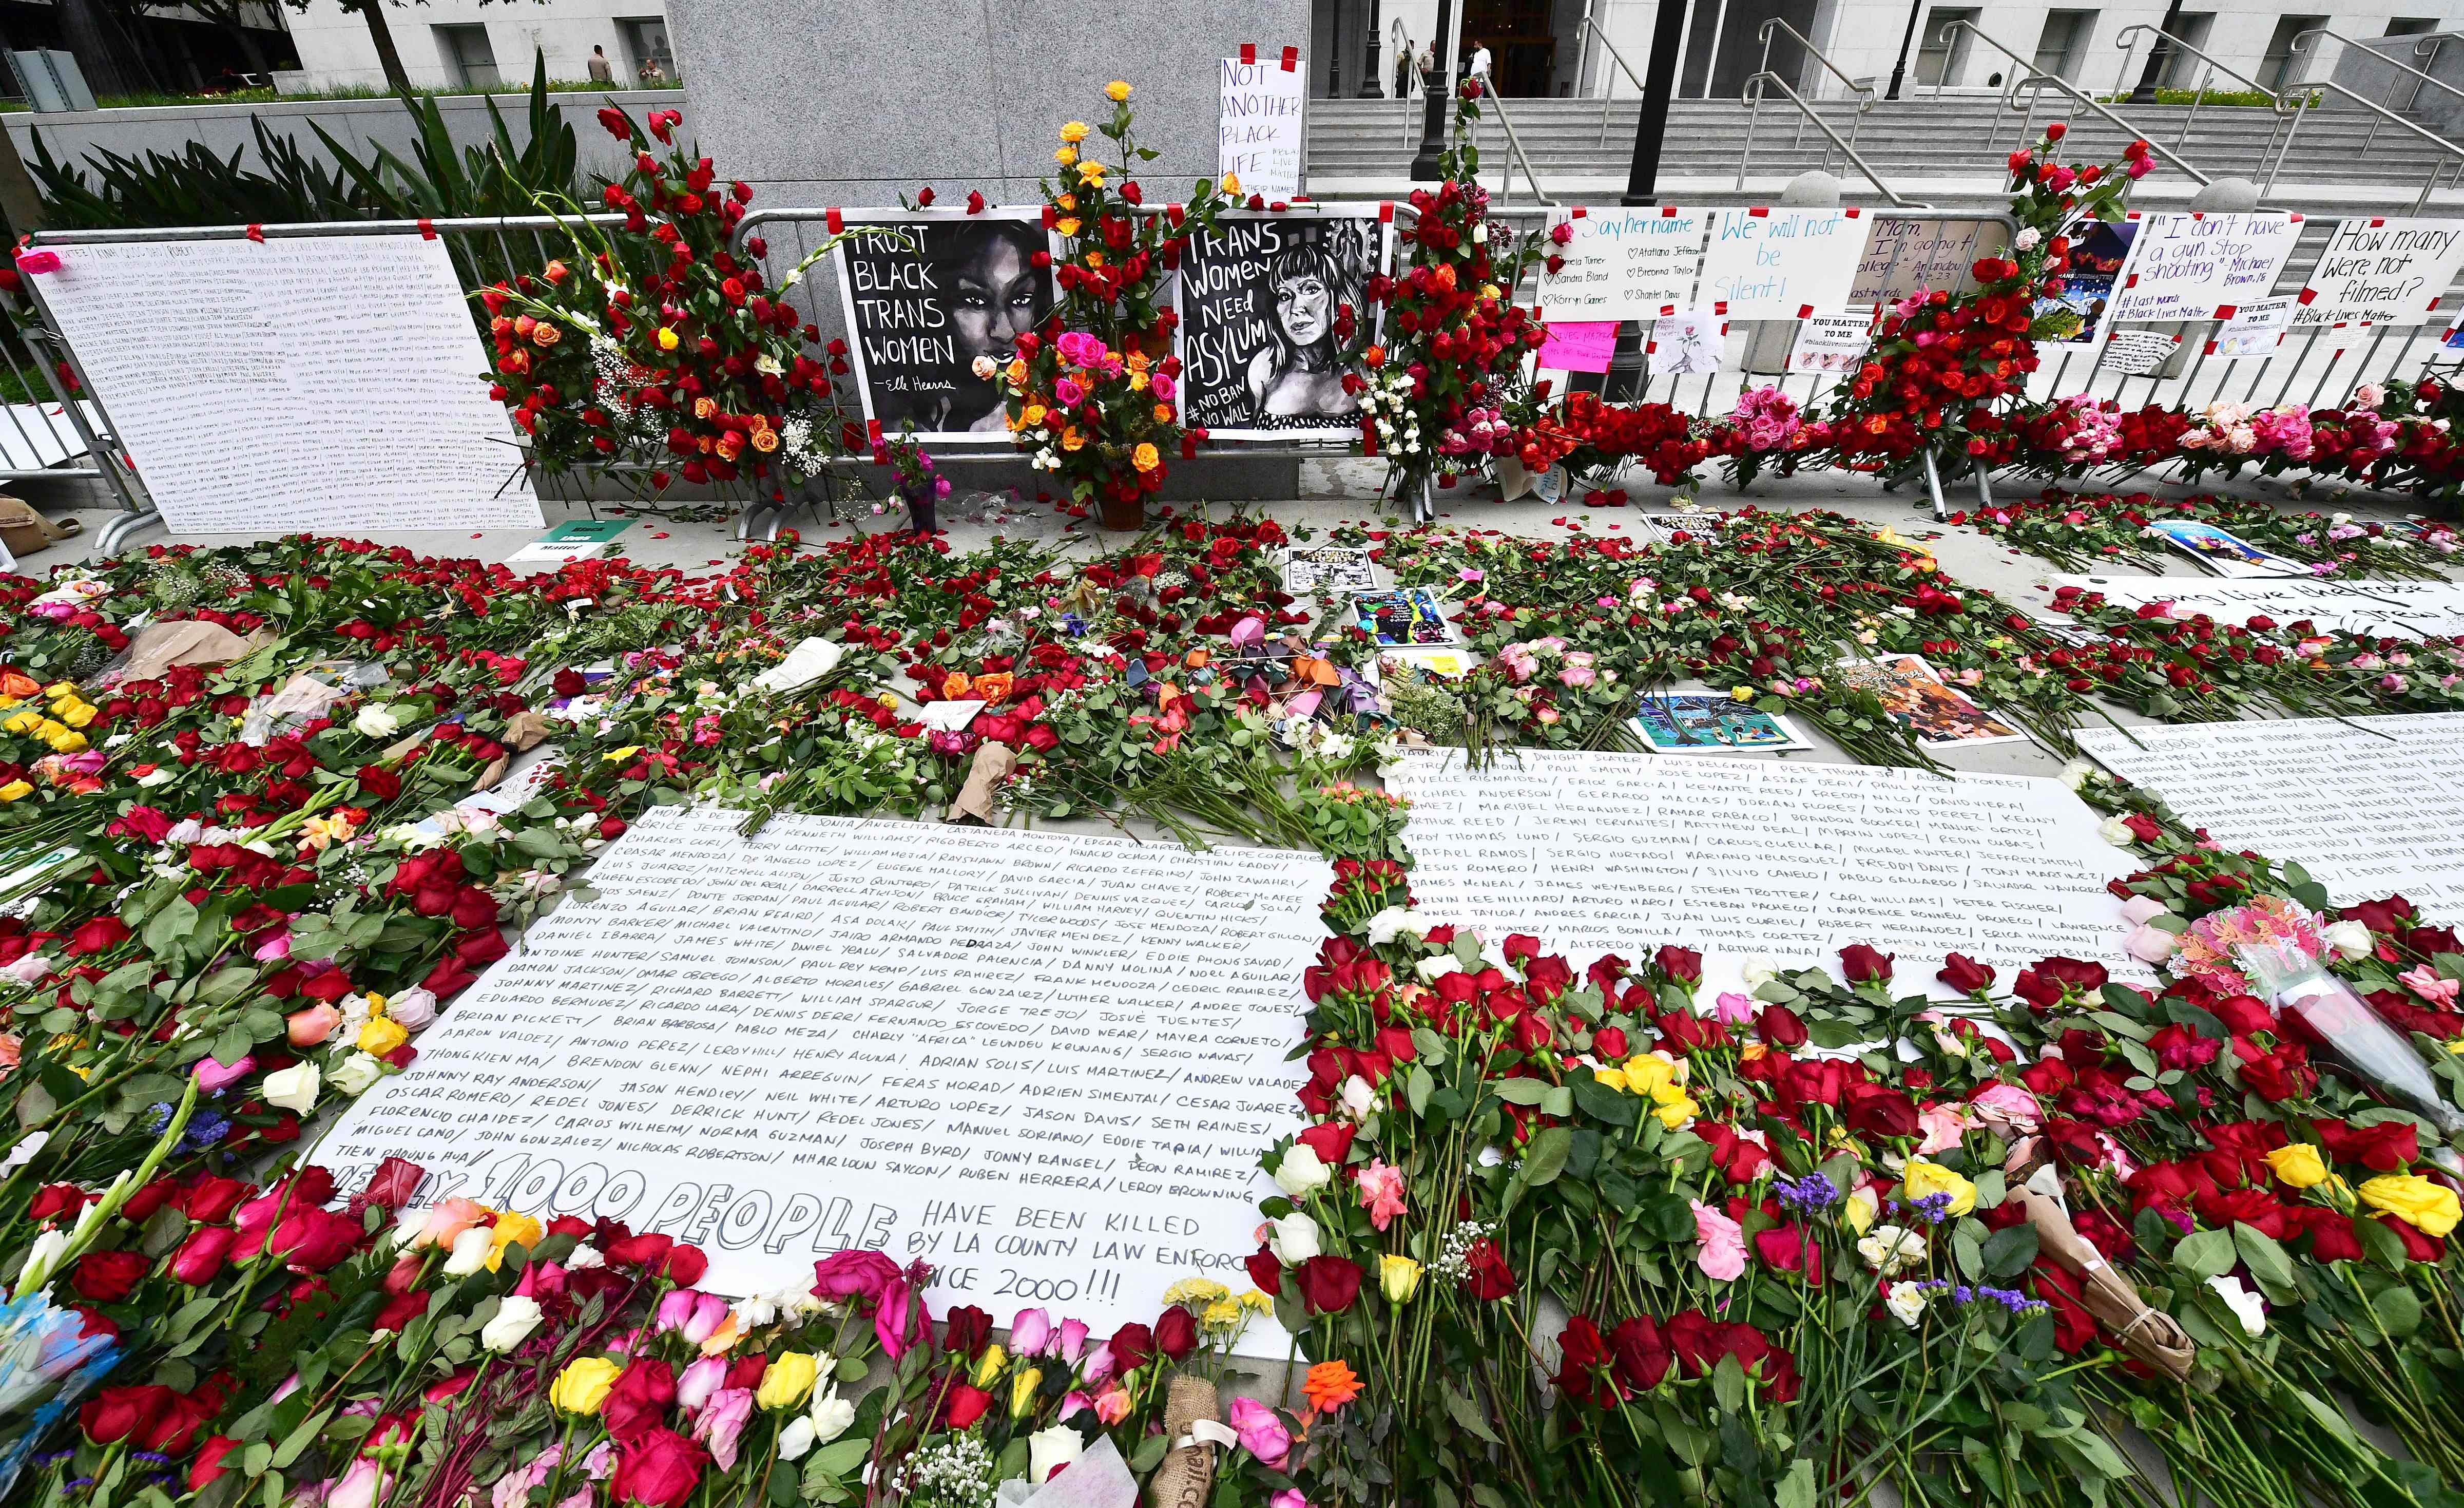 Names of 1000 people killed by LA County law enforcement since 2000 are seen among a growing pile of roses placed throughout the day in front of the Hall of Justice in Los Angeles. (AFP Photo)